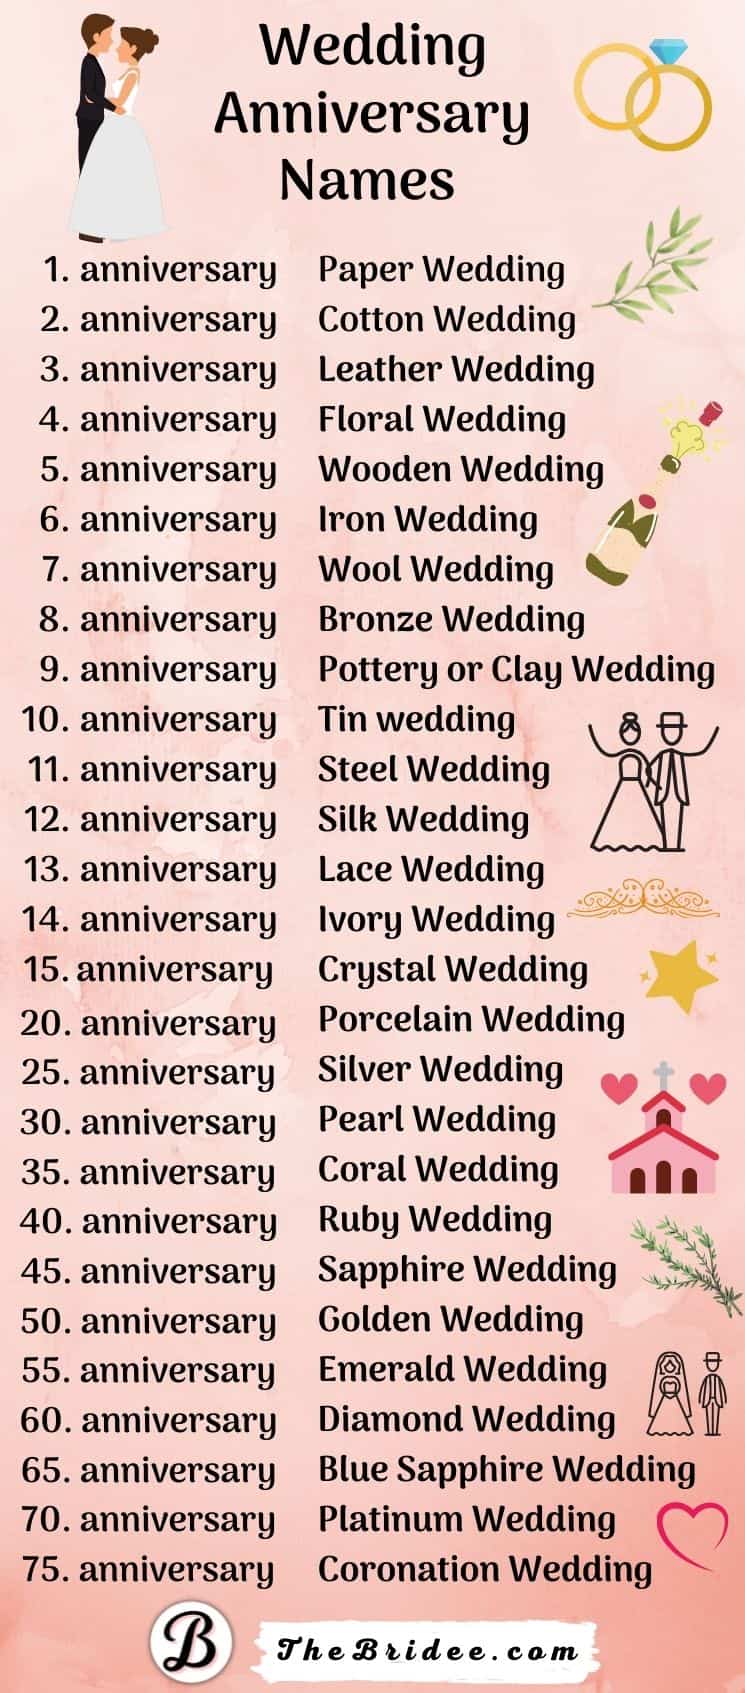 Wedding Anniversary Names by Year (+ Symbols, Flowers, Gifts) 9